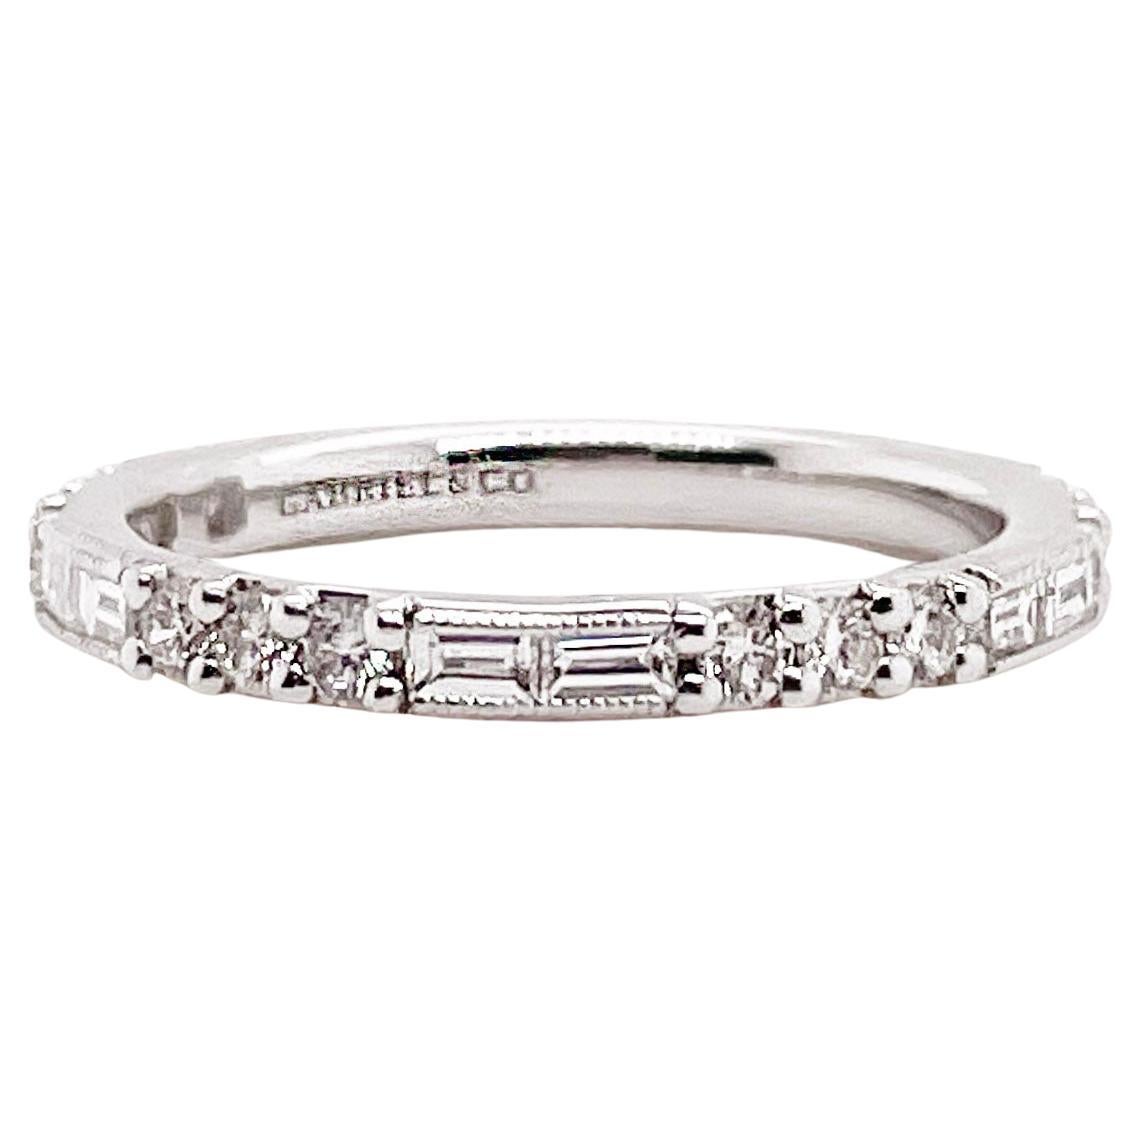 Baguette Diamond Band Stackable Ring, White Gold, Alternating Round & Baguette